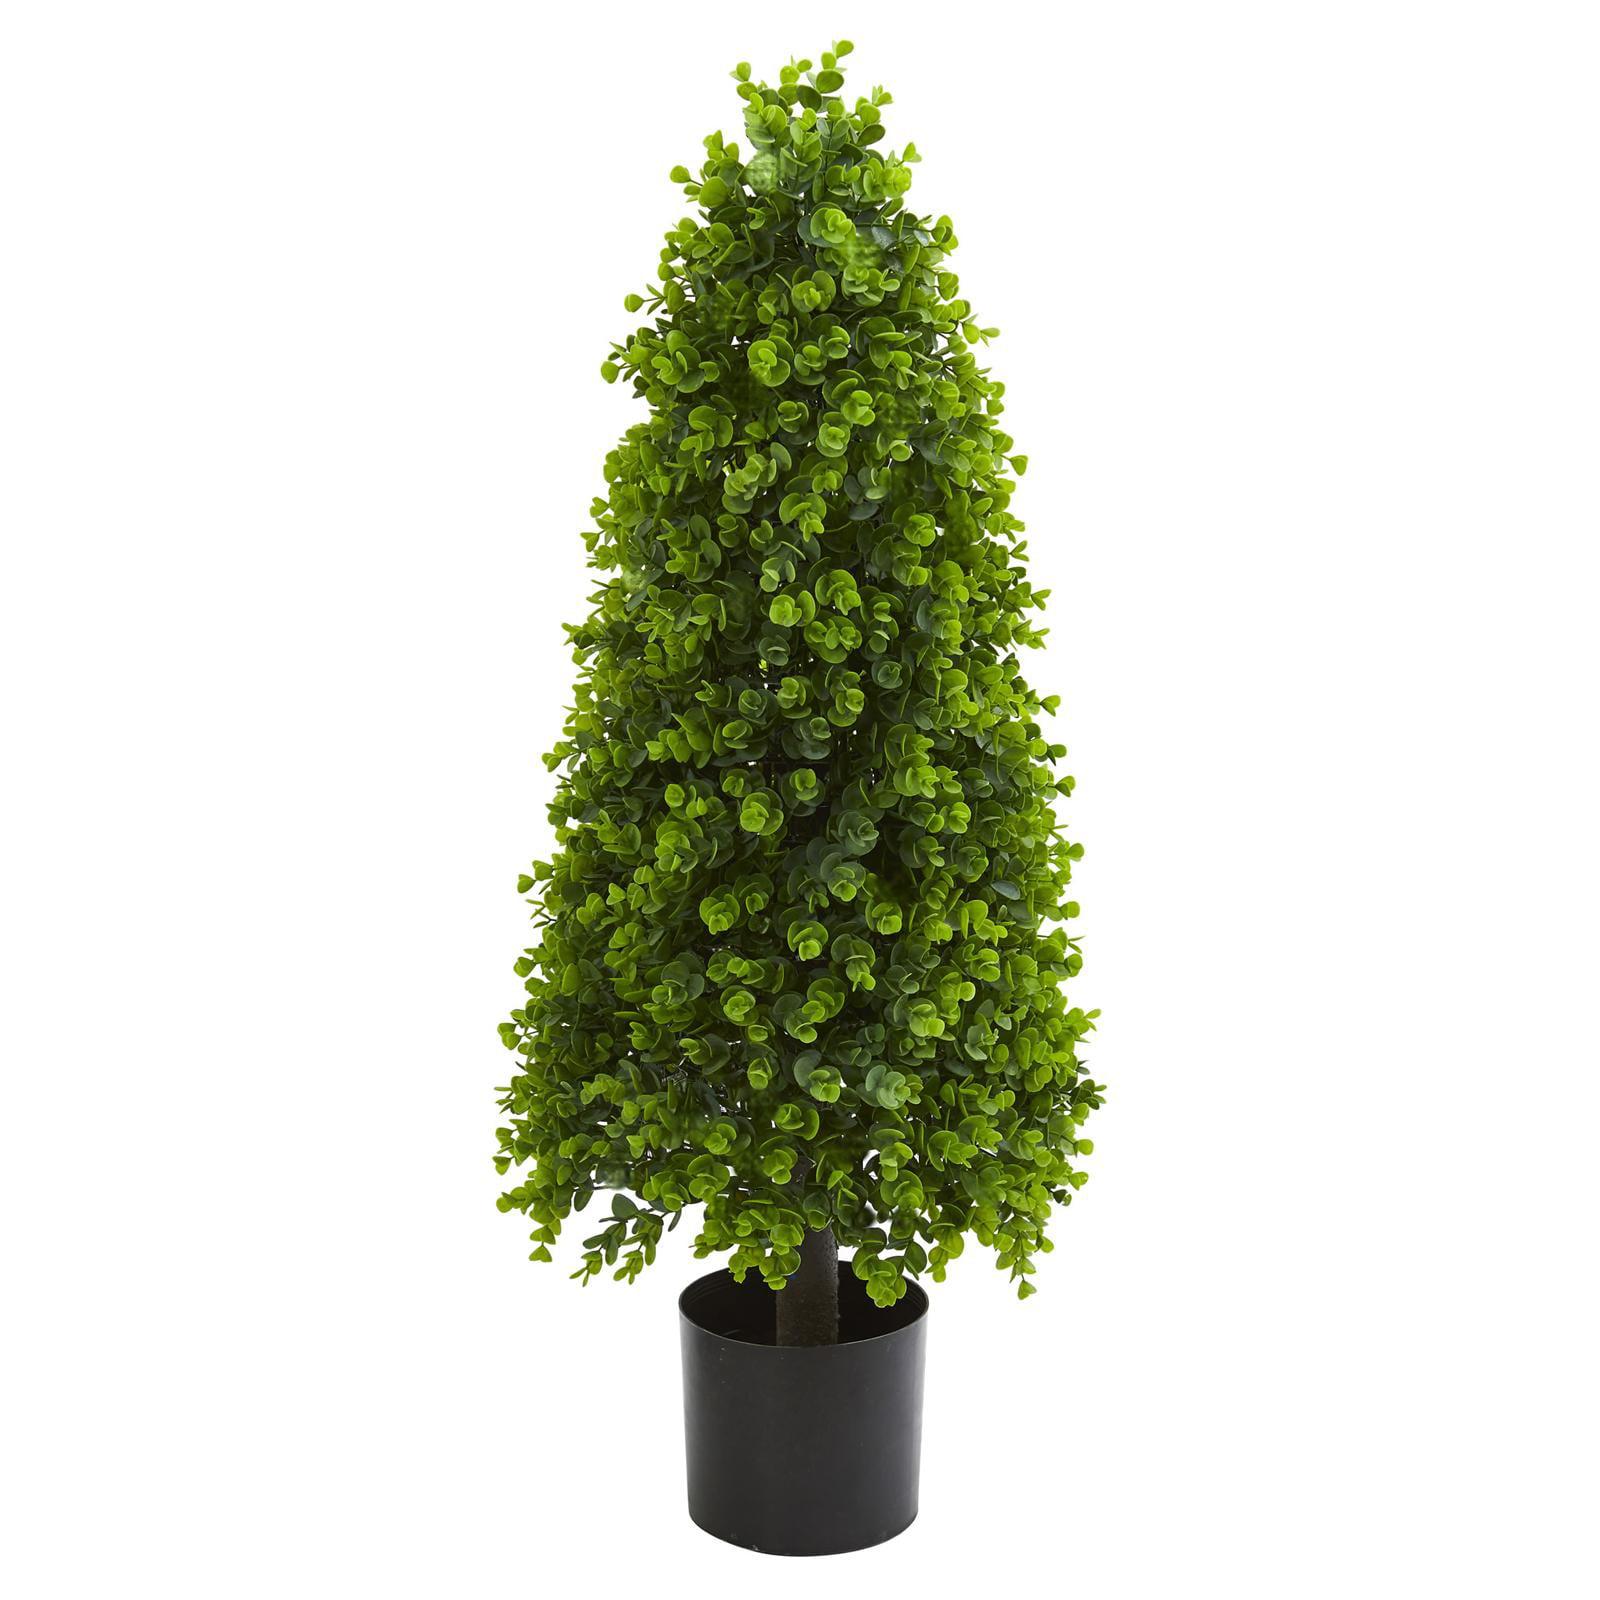 Elegant Green Eucalyptus Topiary with Lights, 40" Potted Outdoor Accent